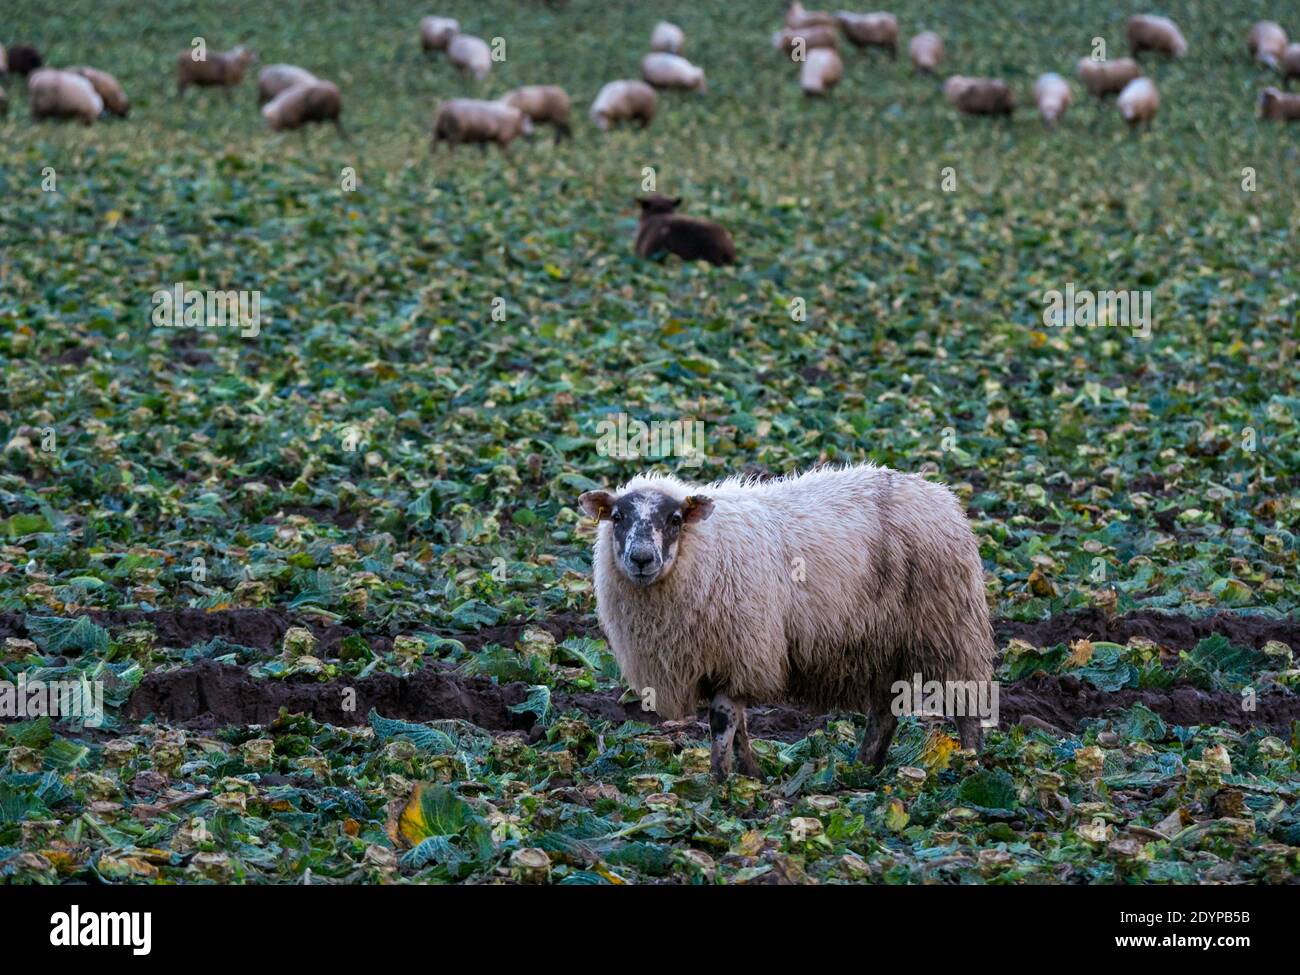 Sheep in harvested cabbage field eating remains, East Lothian, Scotland, UK Stock Photo